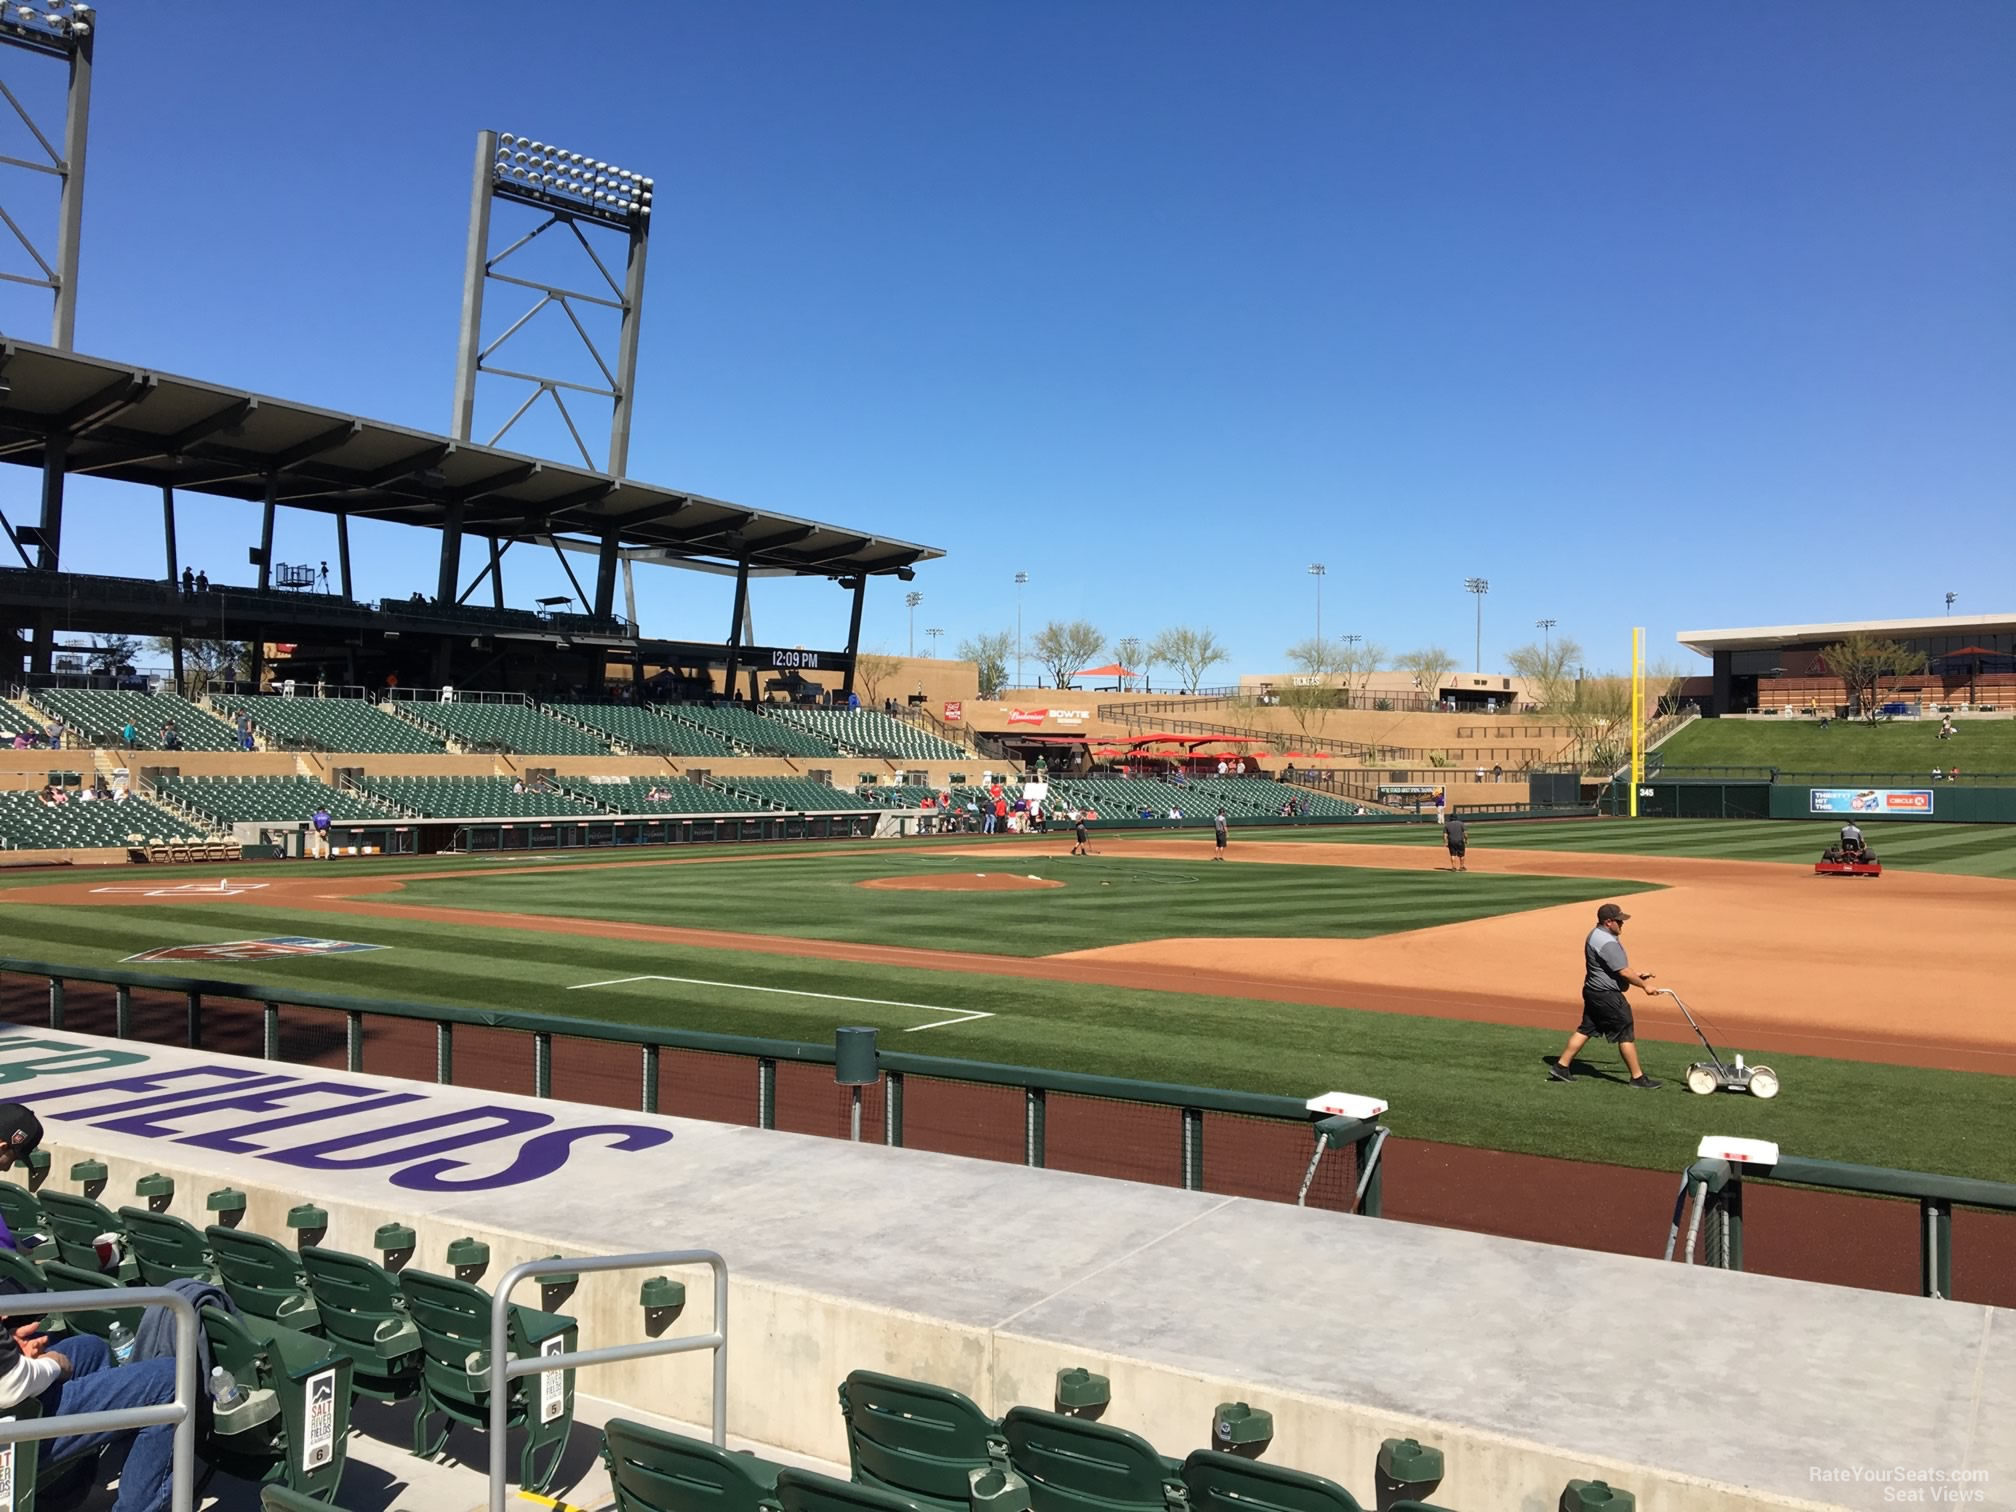 section 105, row 10 seat view  - salt river field at talking stick